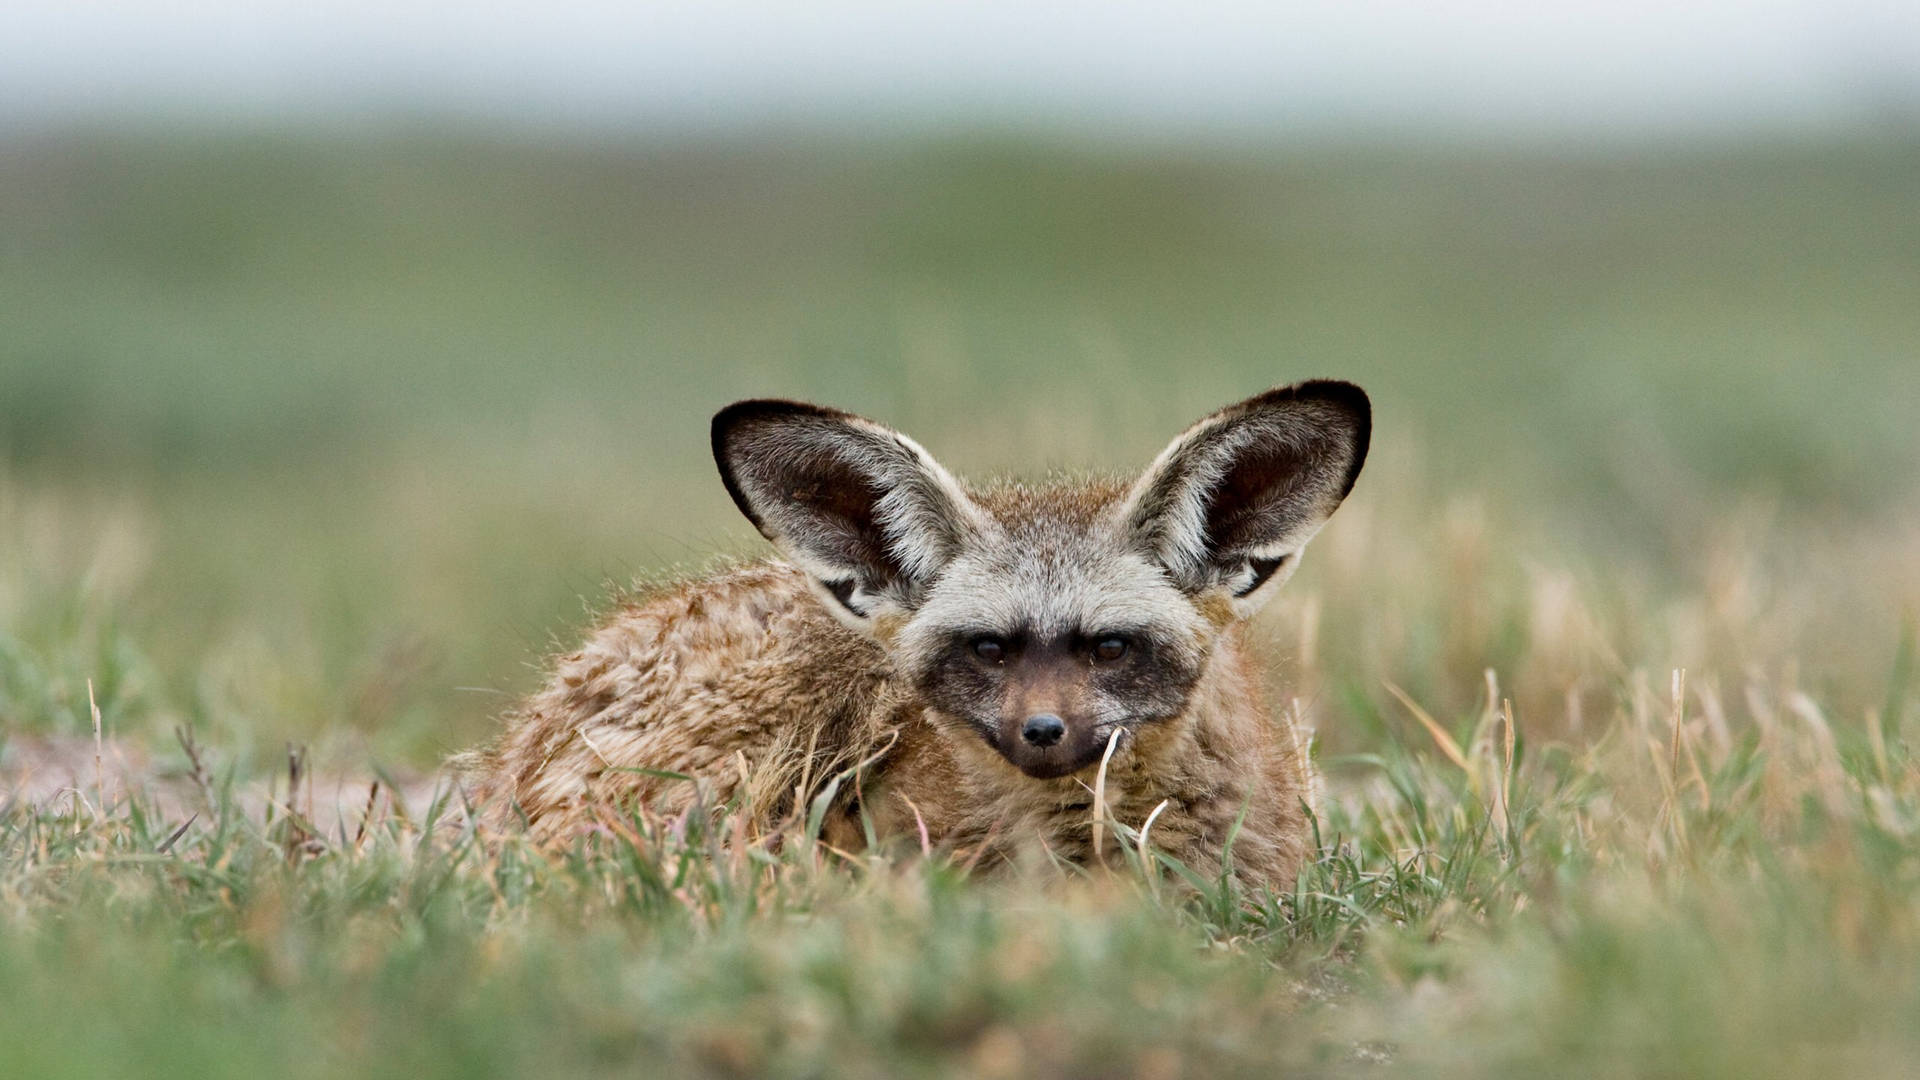 Botswanabat-eared Fox Hiding Can Be Translated To 